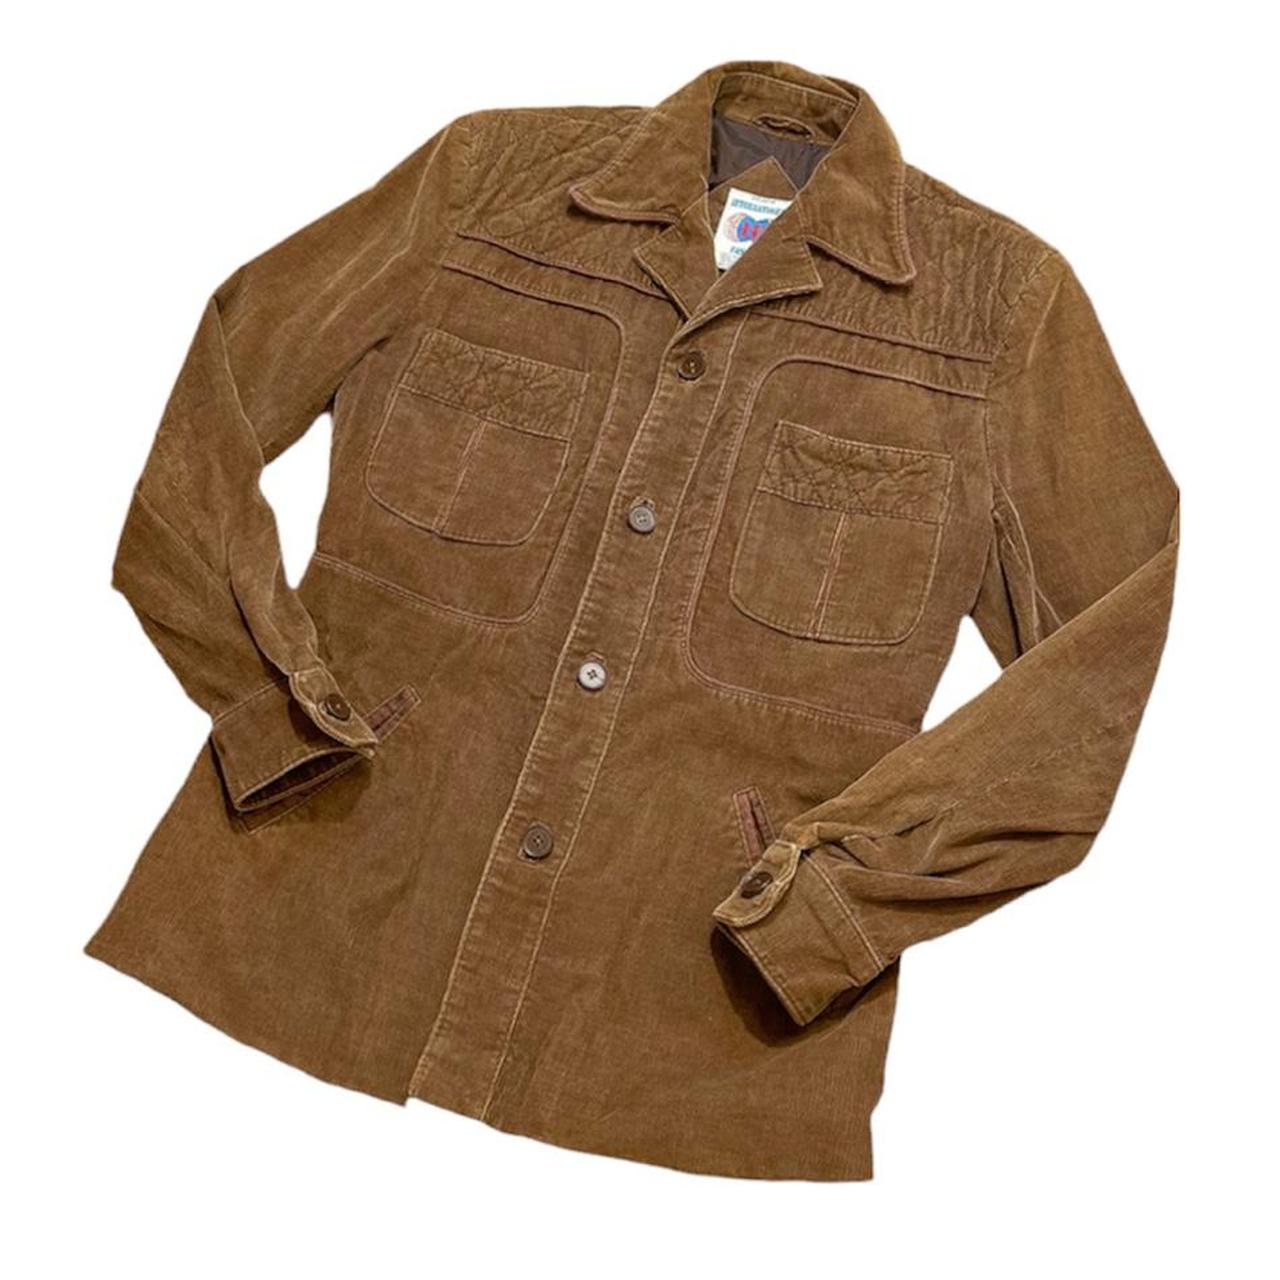 Product Image 1 - 70’s Corduroy jacket, button down